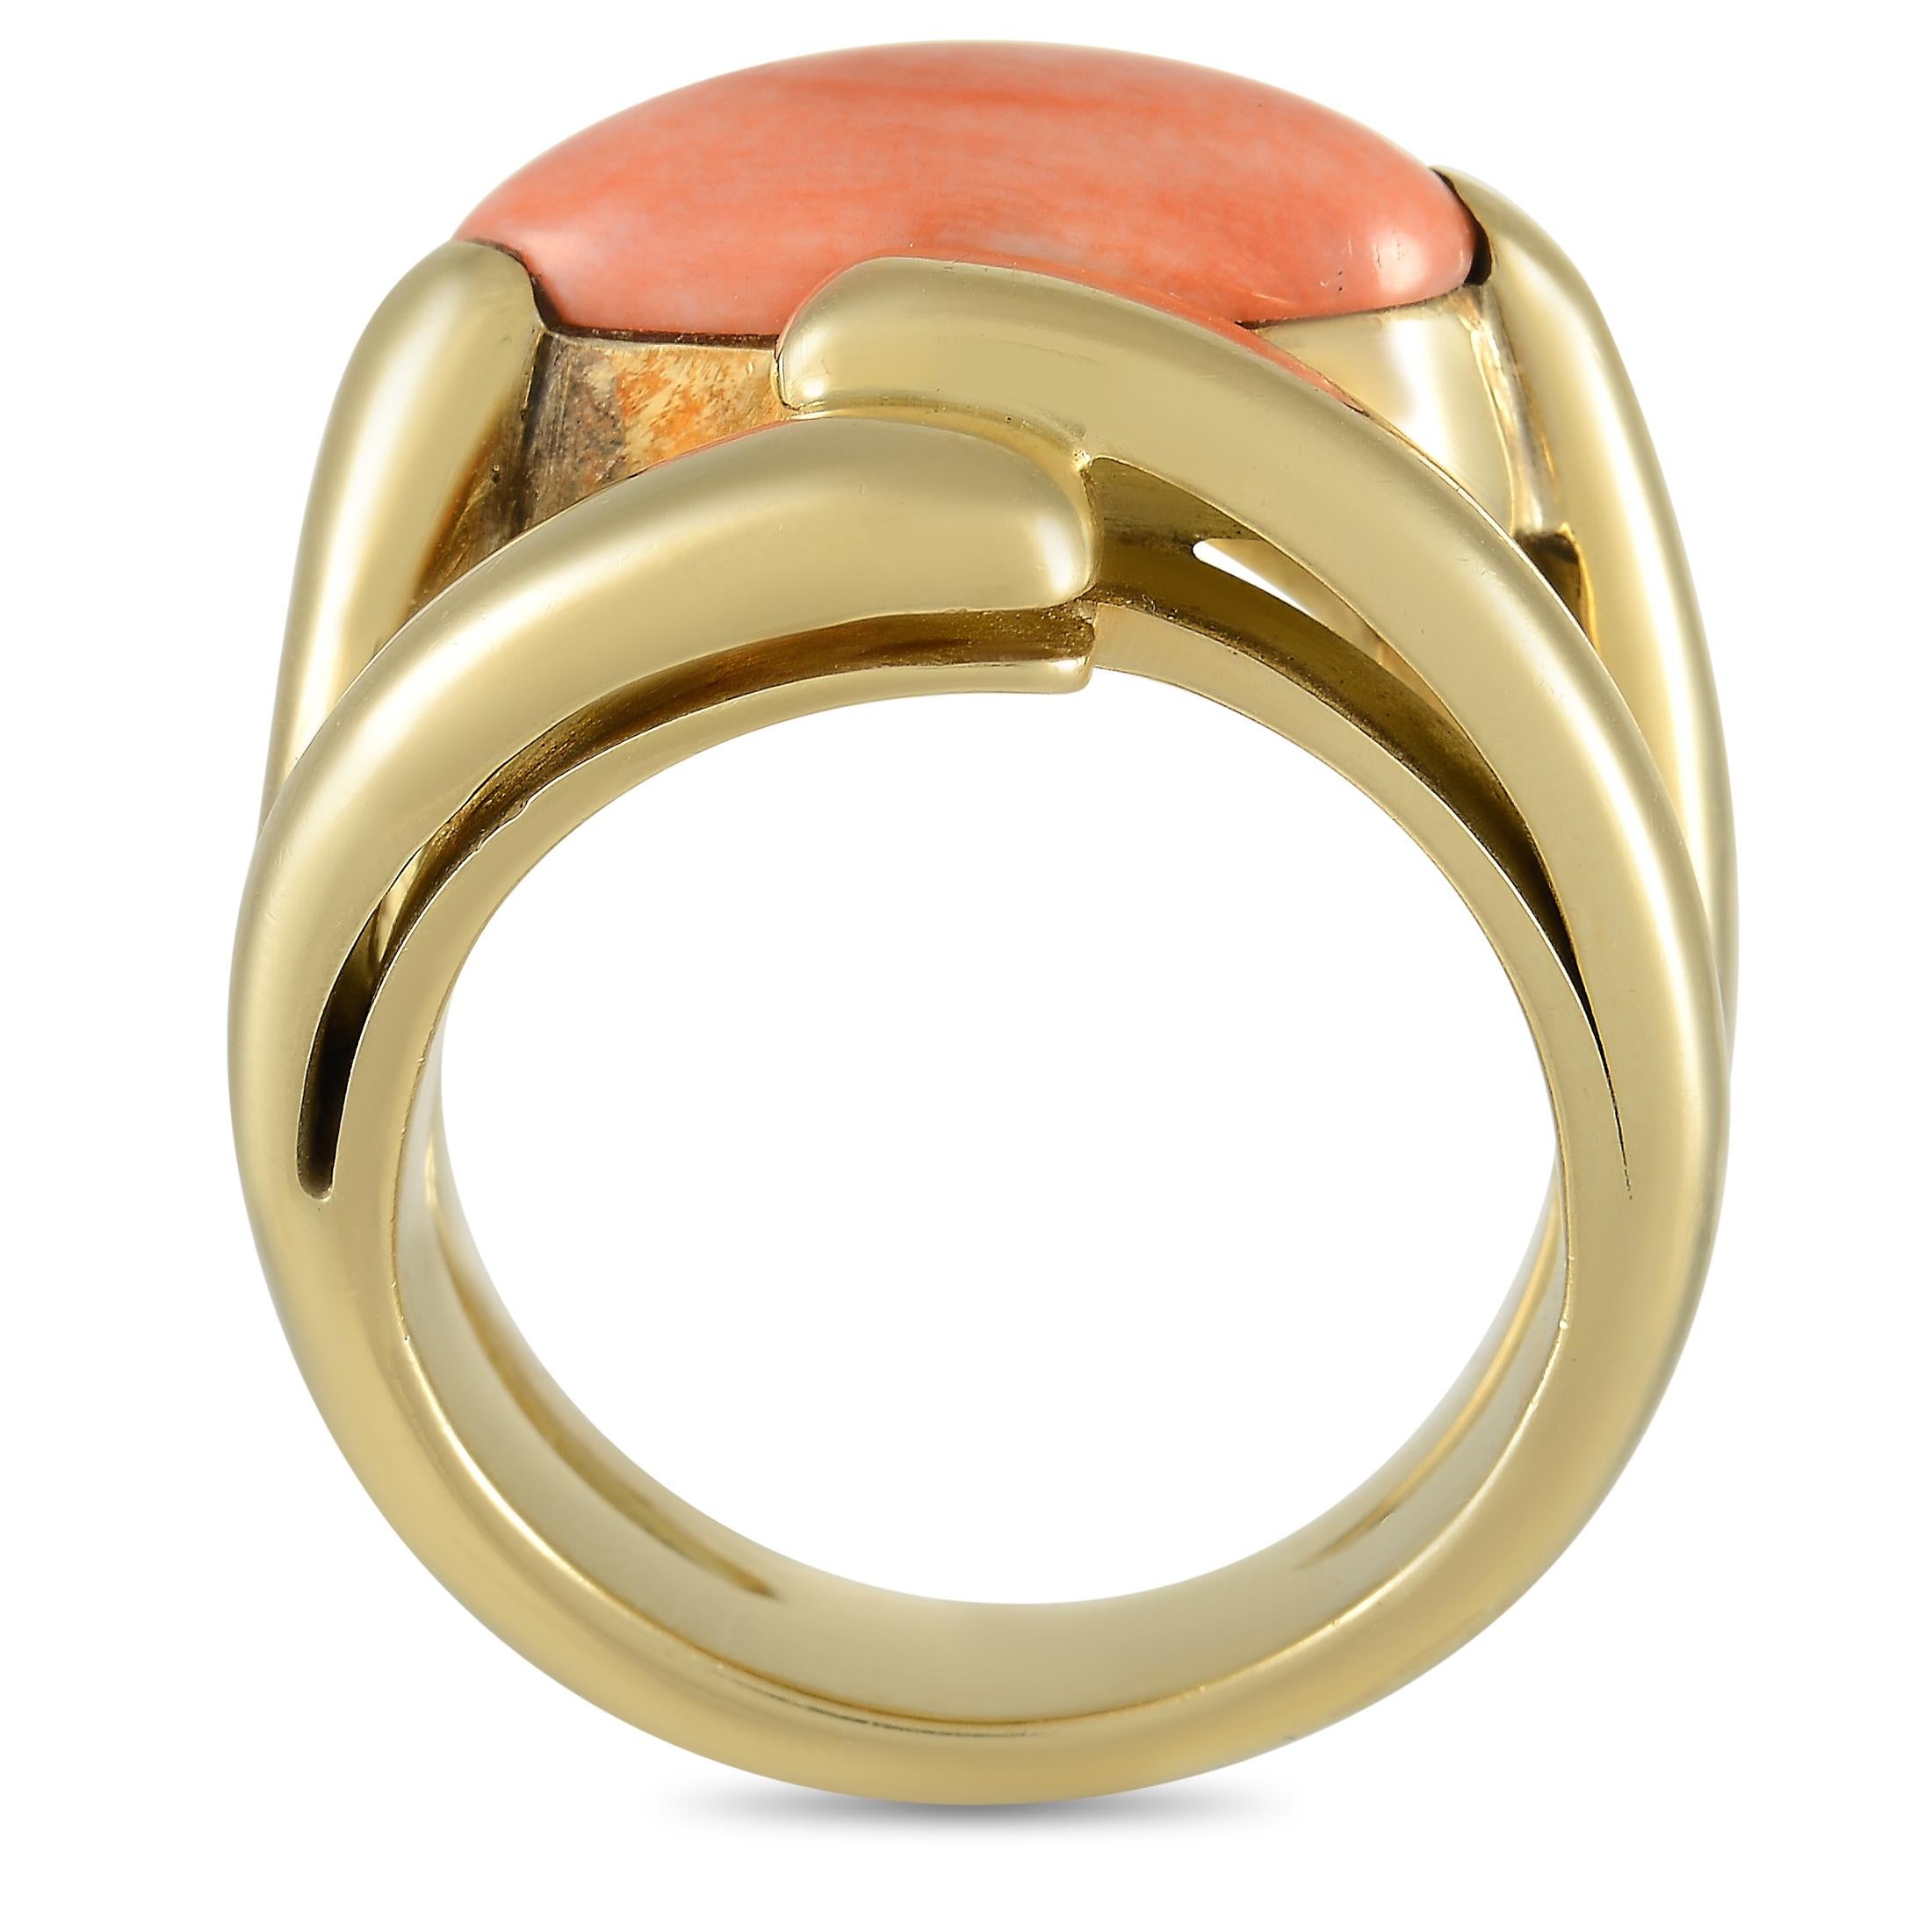 A stylish setting crafted from 18K yellow gold provides the perfect foundation for this dynamic luxury ring. Bold and elegant, this piece features a 12.5mm wide band and a 10mm top height. At the center, you’ll find a captivating coral gemstone that